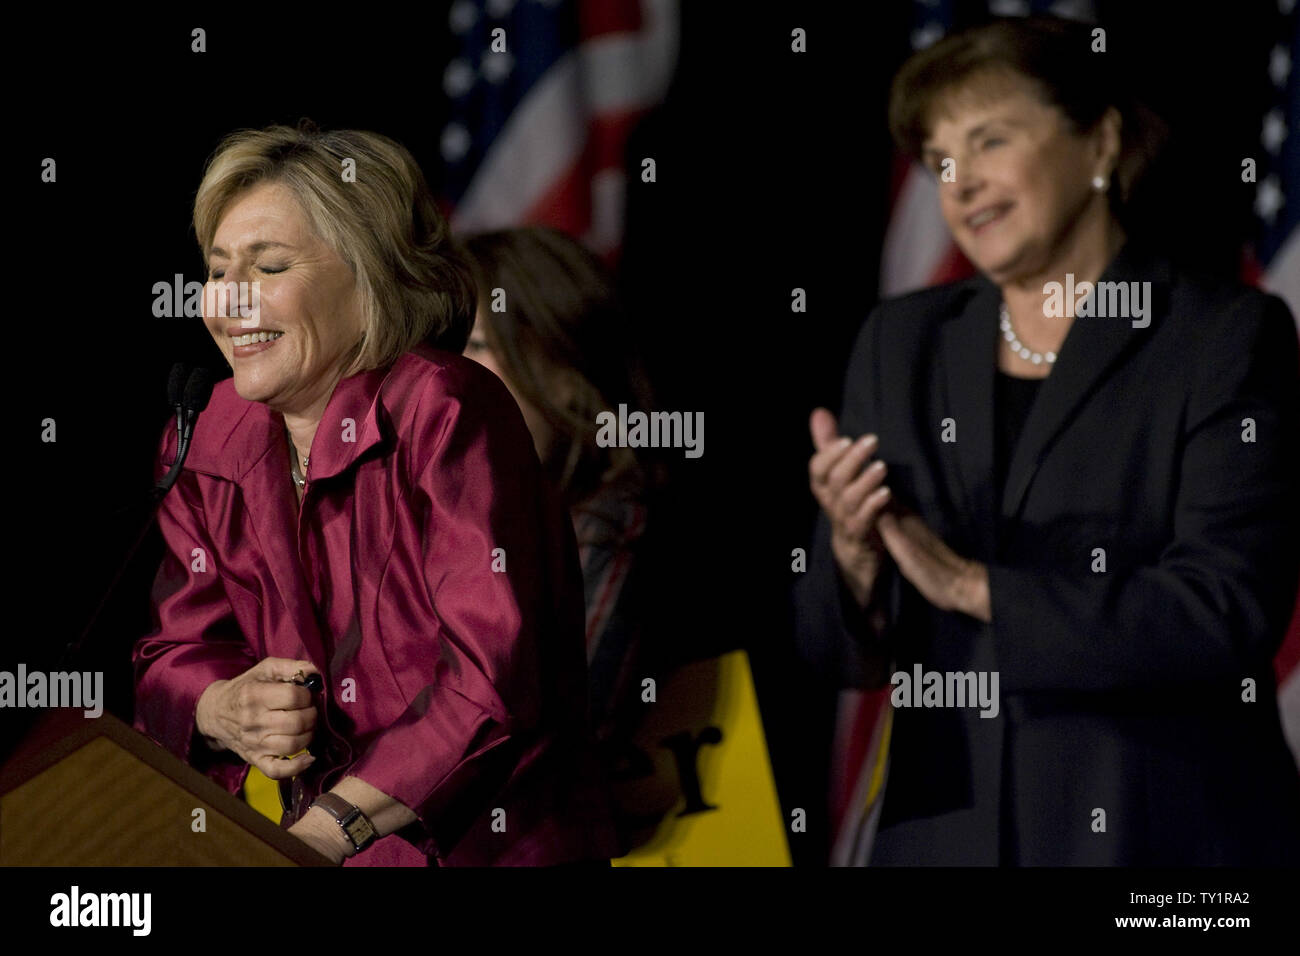 Democratic Sen. Barbara Boxer declares victory over Republican candidate Carly Fiorina on election night November 2, 2010, at the Renaissance Hollywood Hotel in Los Angeles, California.  The Democrats held onto the Senate but the Republicans took control of the House in the Federal Elections.   UPI/Jonathan Alcorn Stock Photo